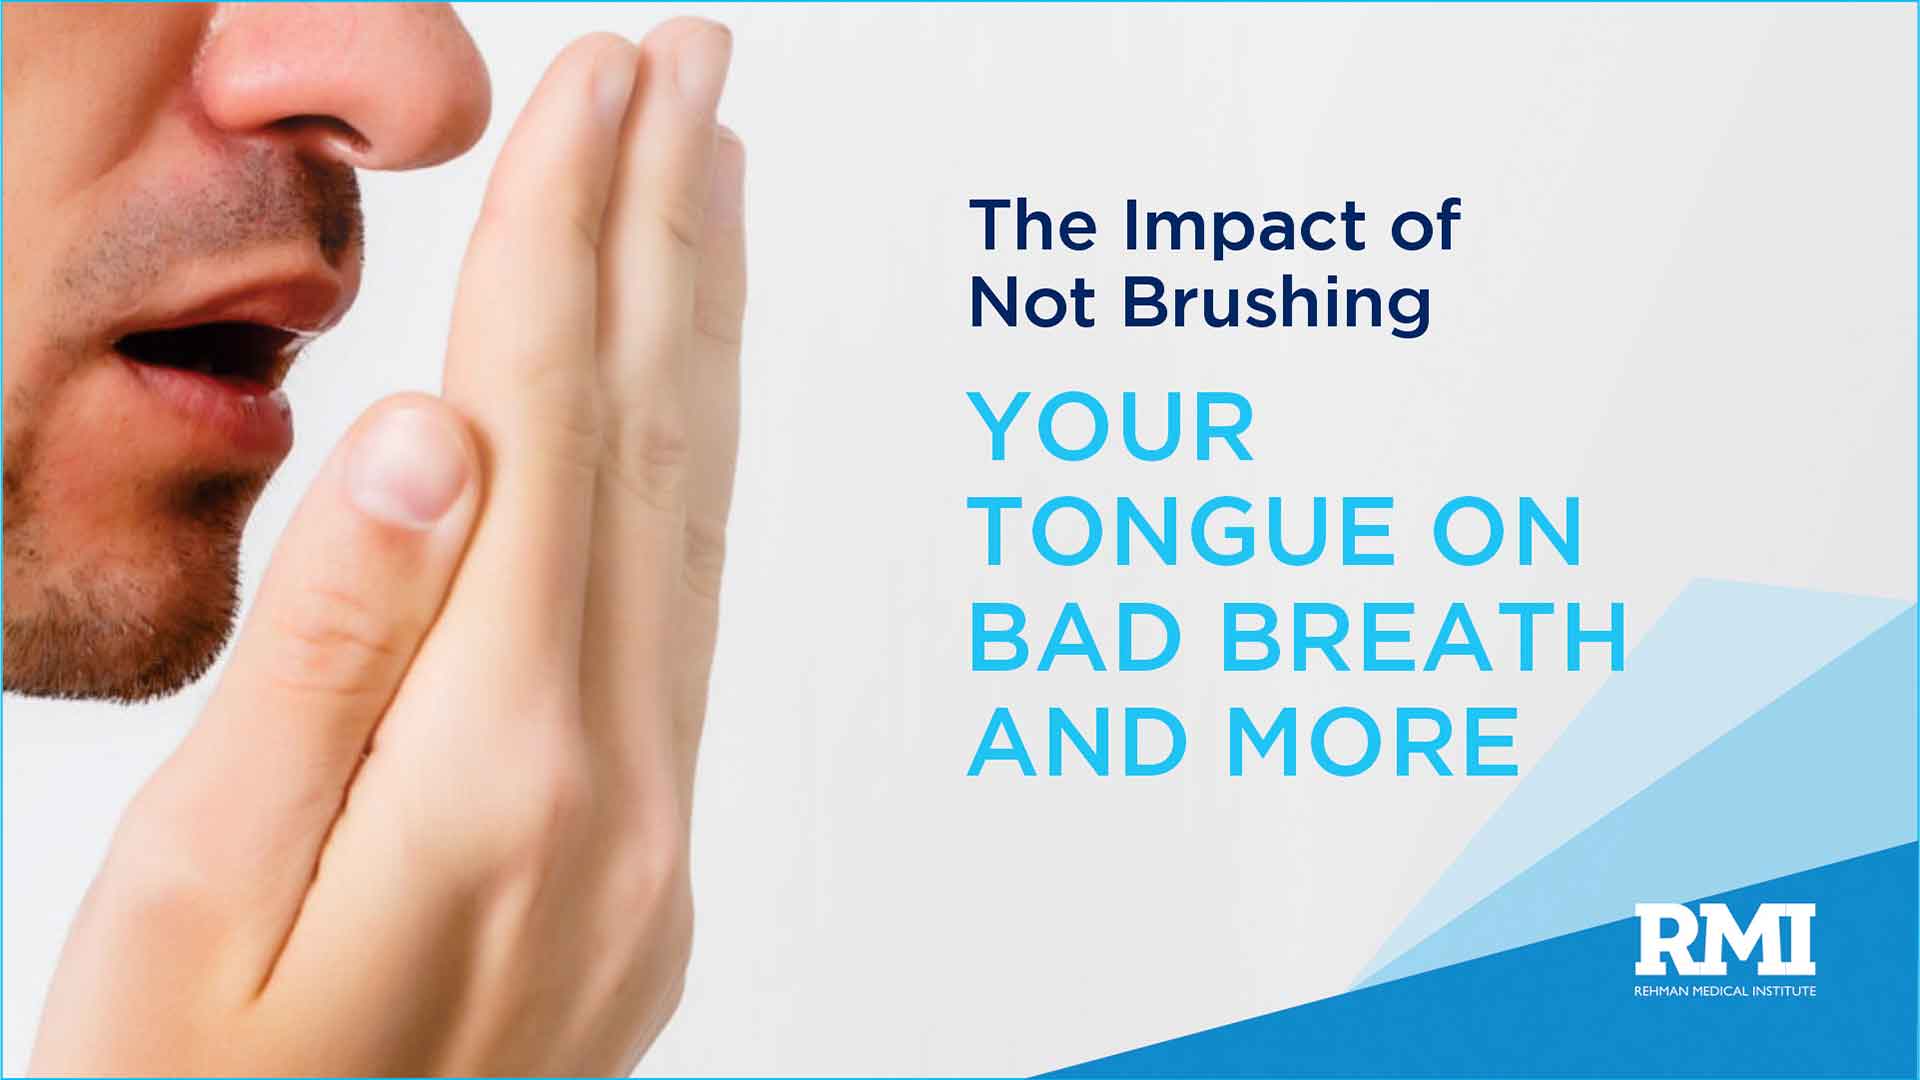 The Impact of Not Brushing Your Tongue on Bad Breath and More